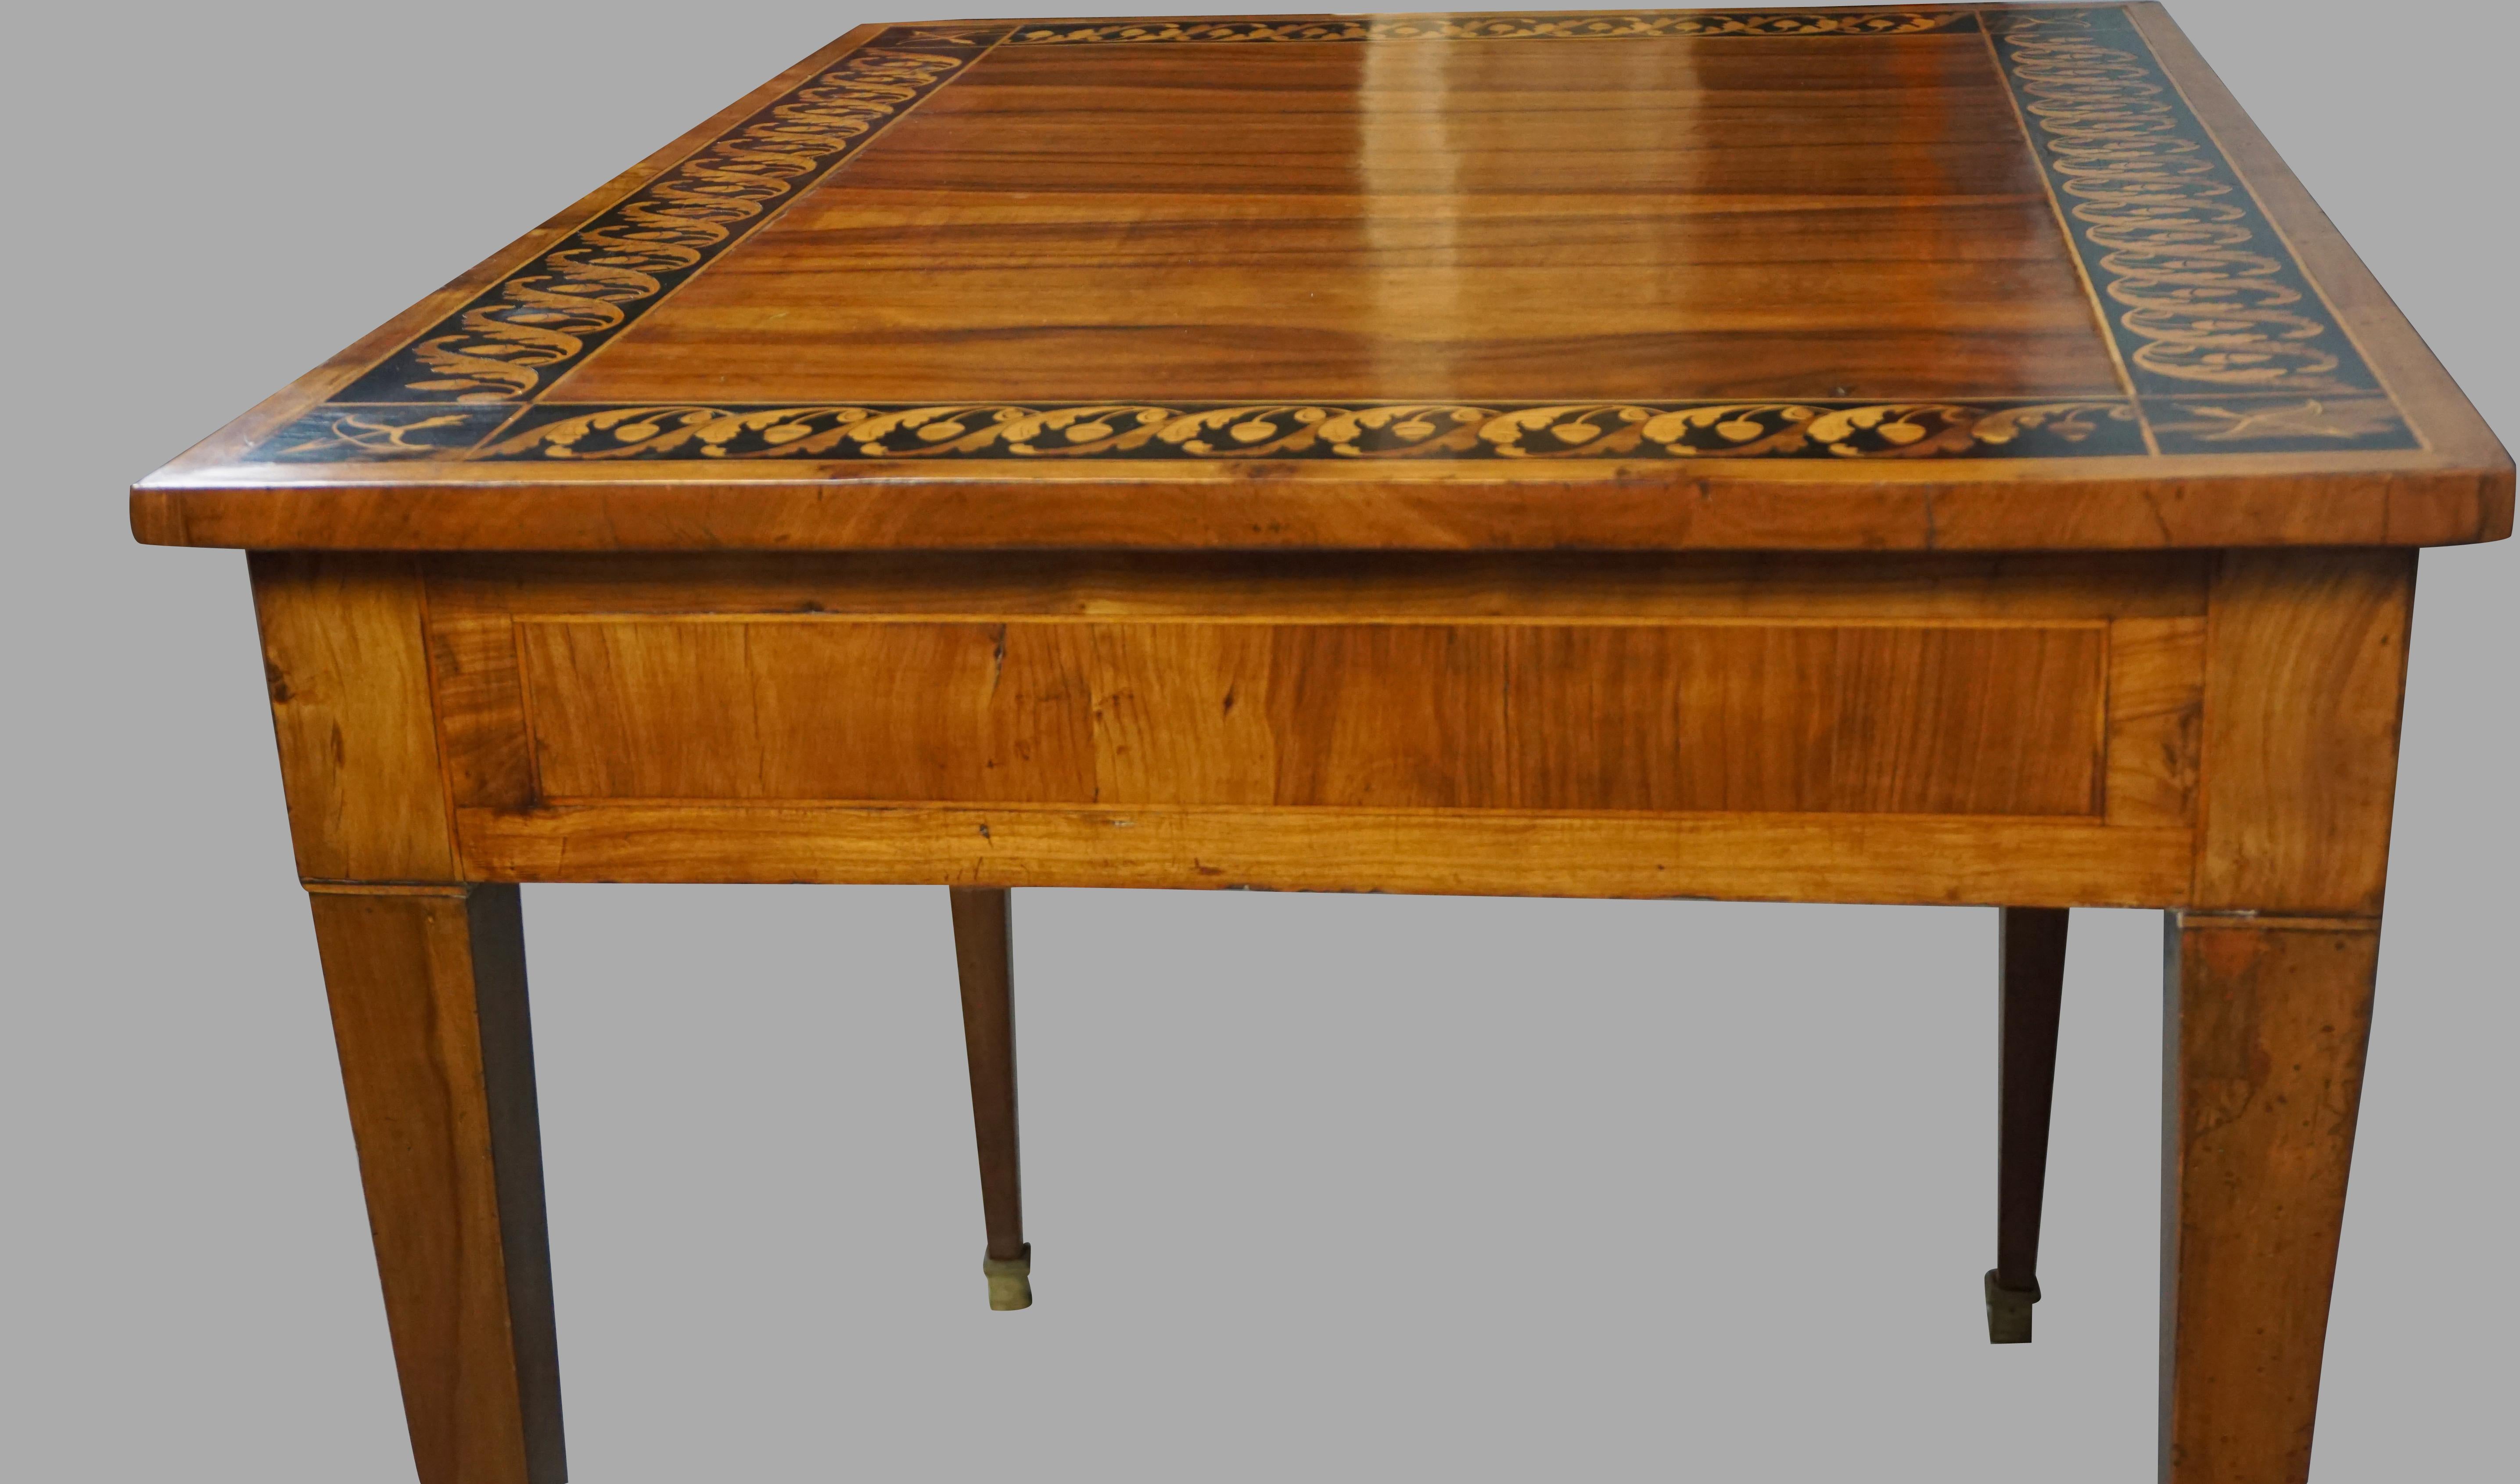 Boxwood Italian Neoclassical Inlaid Walnut Table with Drawer